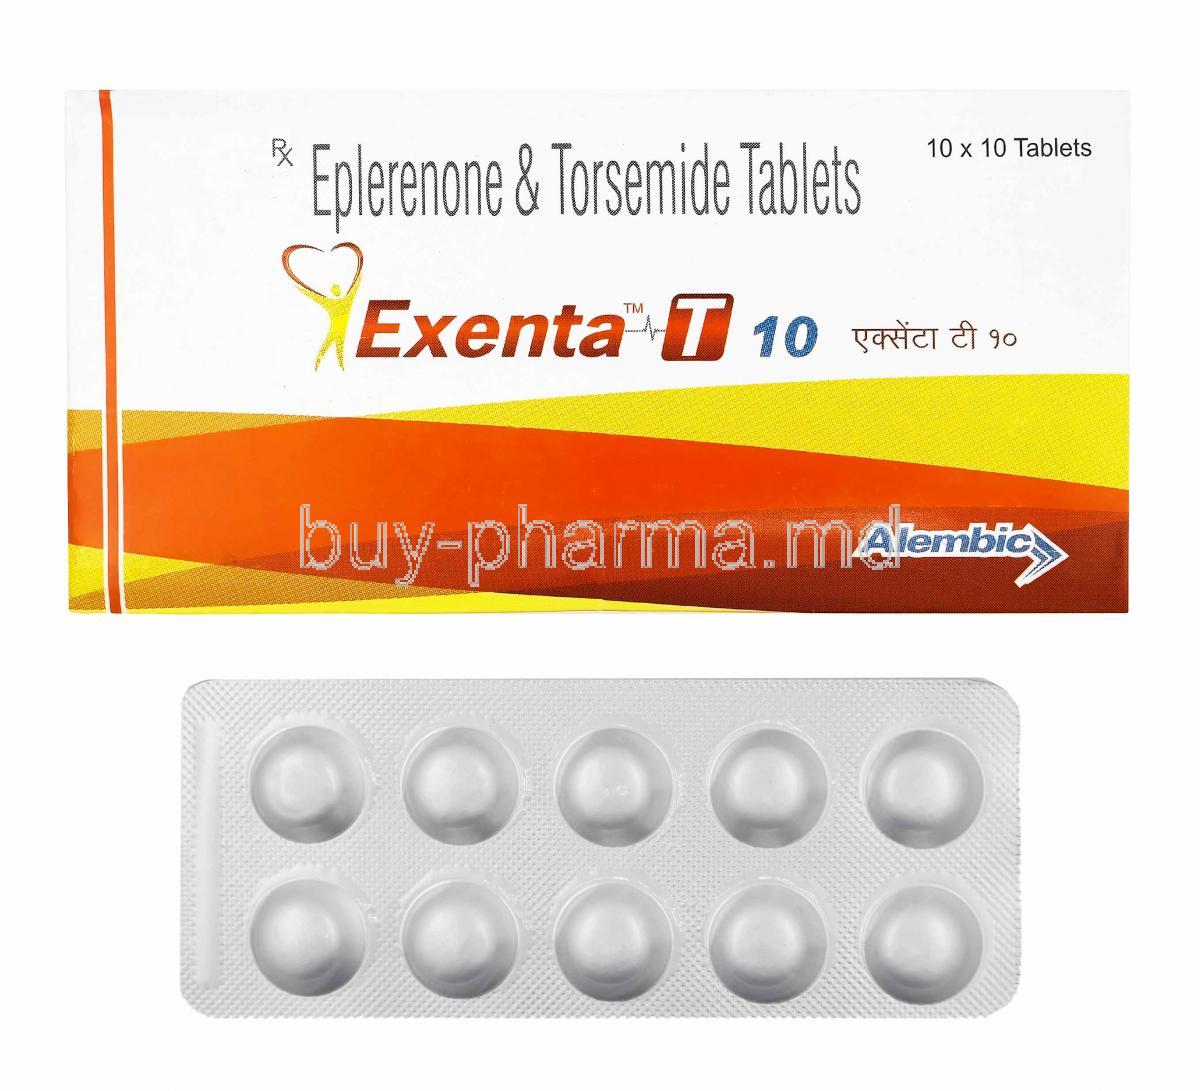 Exenta T, Eplerenone and Torasemide 10mg, box and tablets